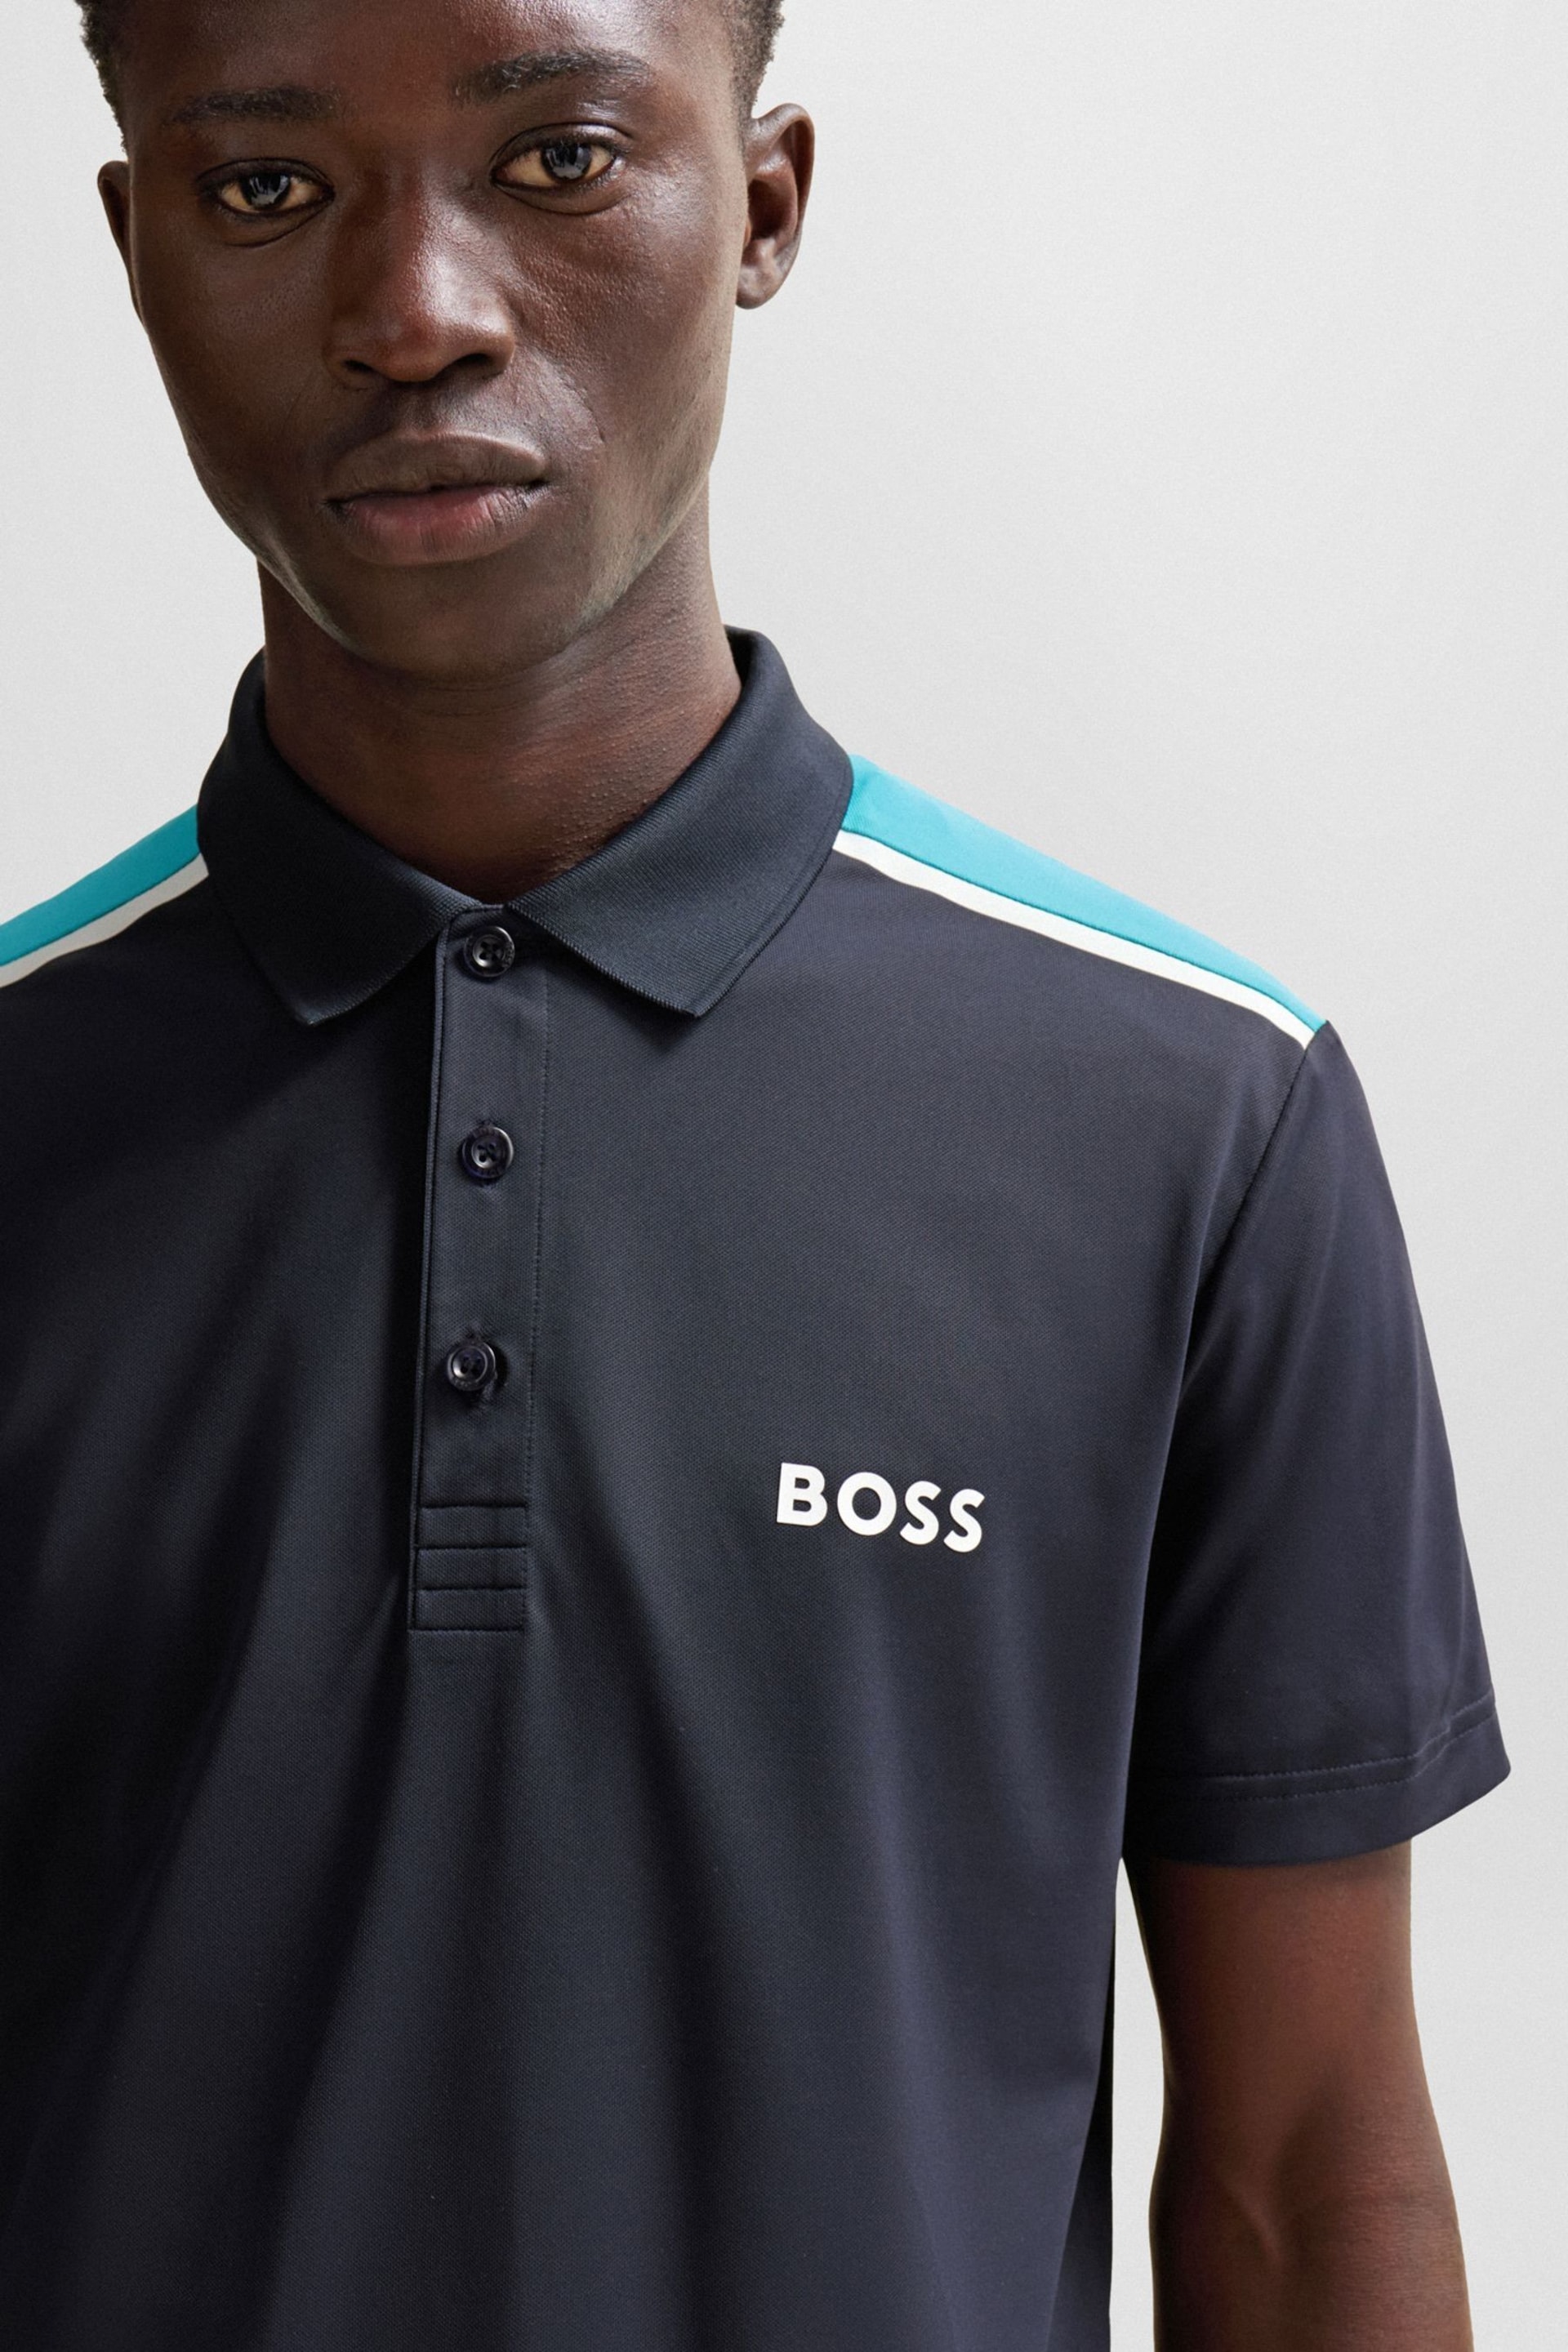 BOSS Black Performance-Stretch Polo Shirt With Contrast Logo - Image 1 of 5